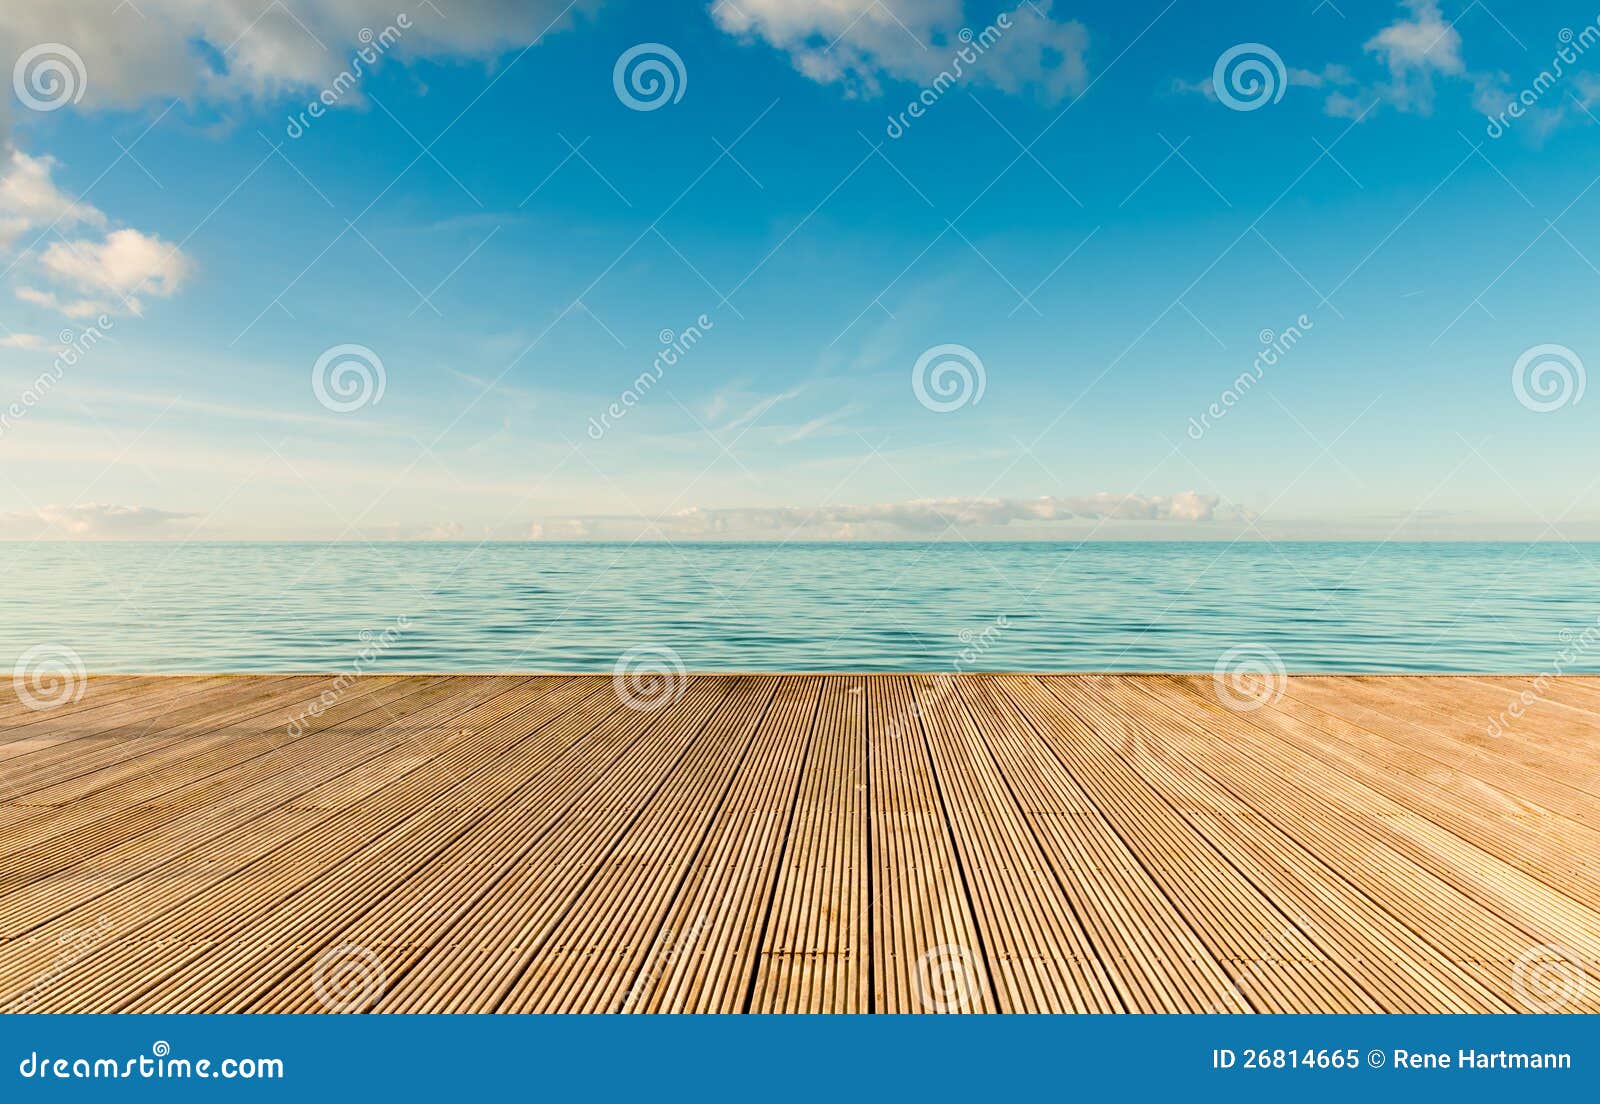 beautiful seascape with empty wooden pier